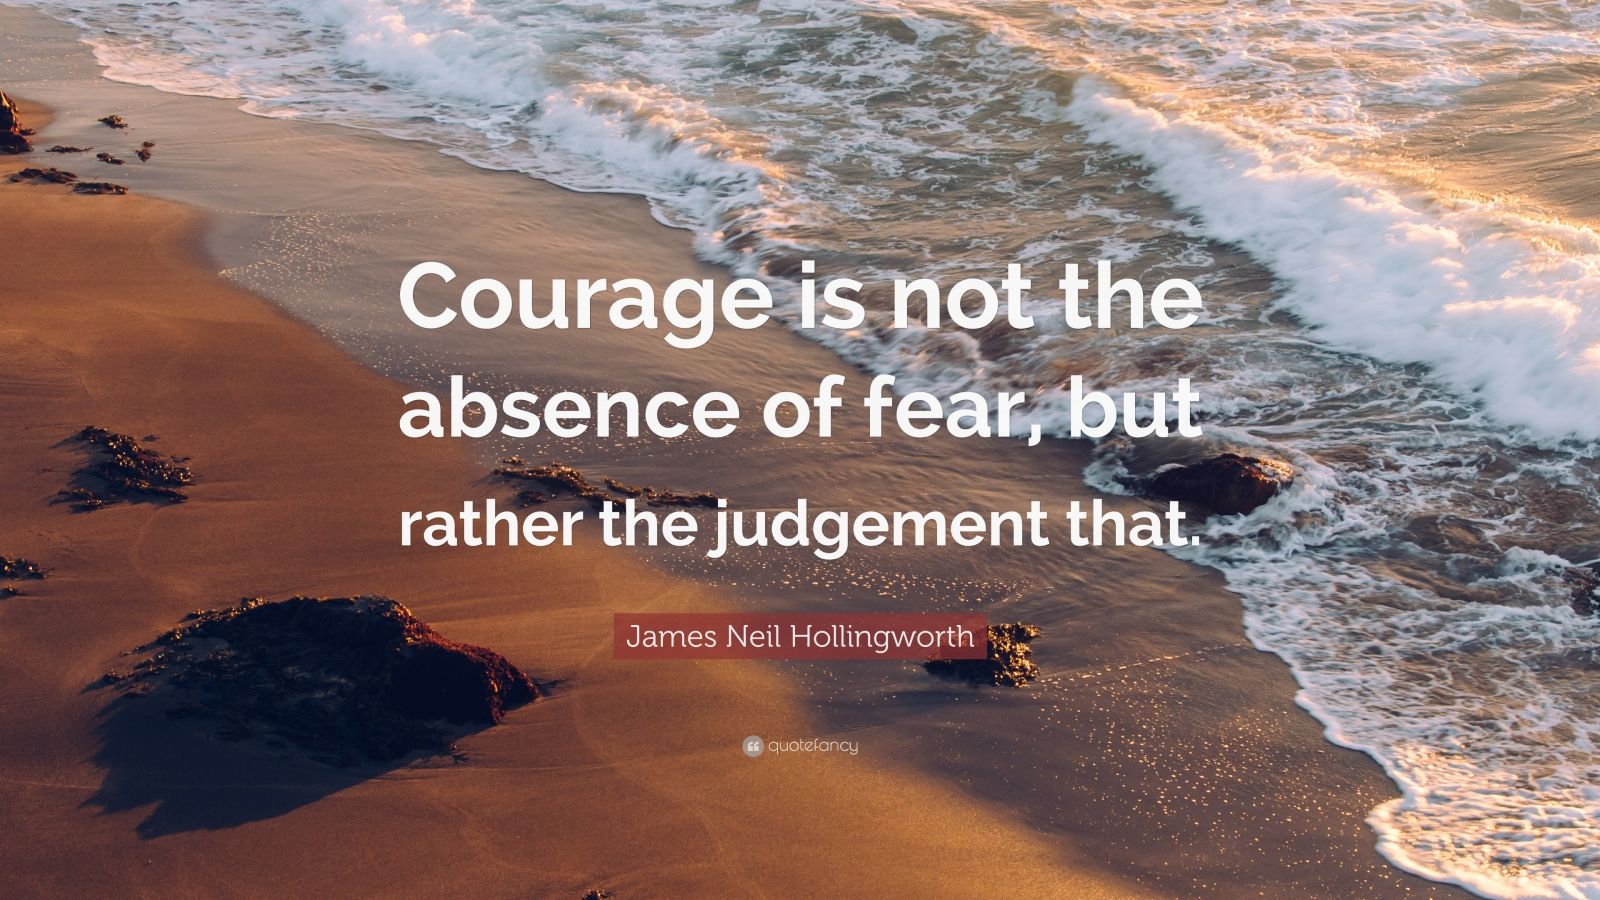 James Neil Hollingworth Quote: “Courage is not the absence of fear, but ...